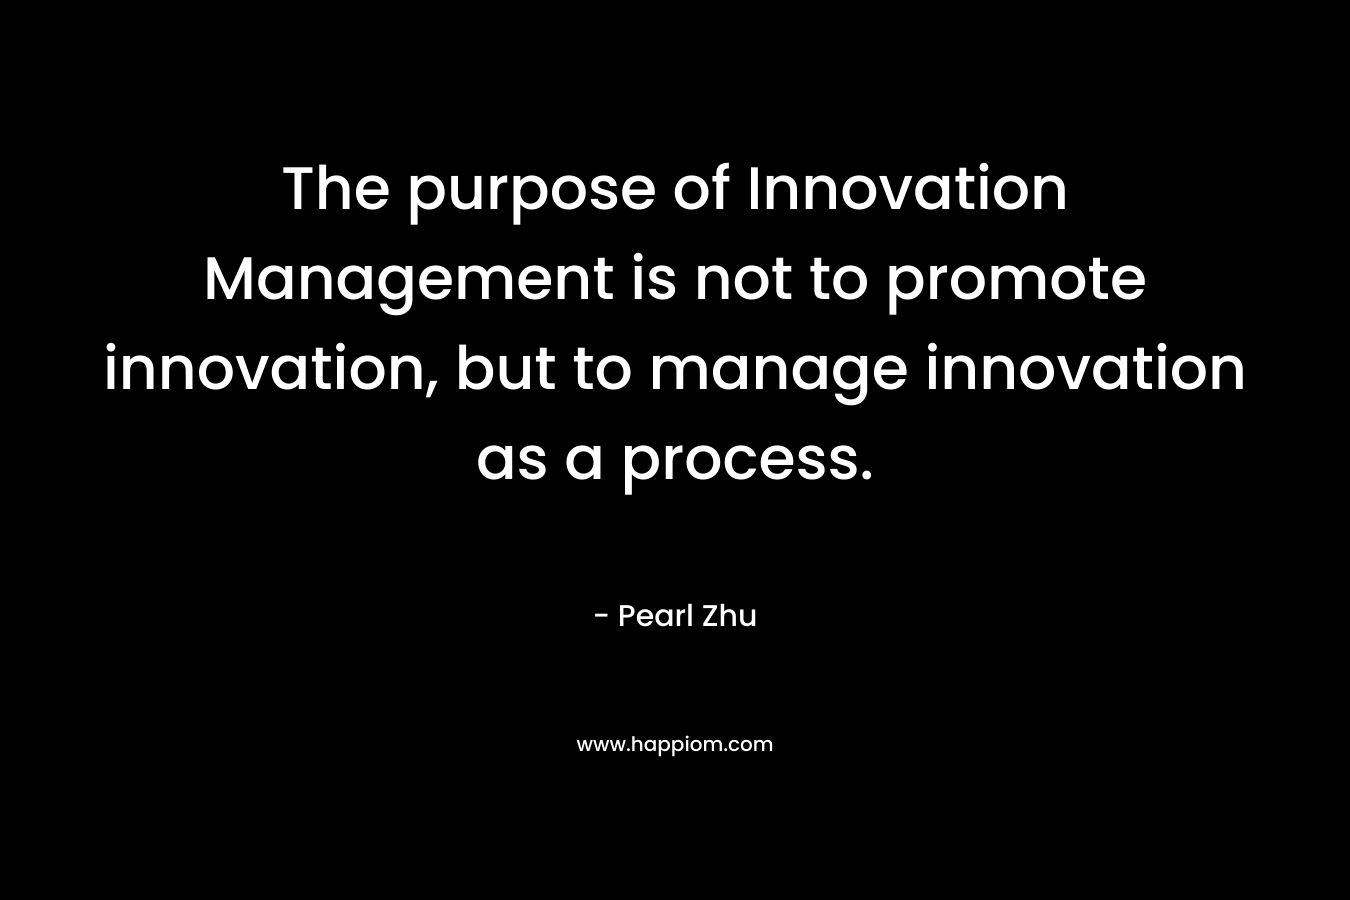 The purpose of Innovation Management is not to promote innovation, but to manage innovation as a process. – Pearl Zhu